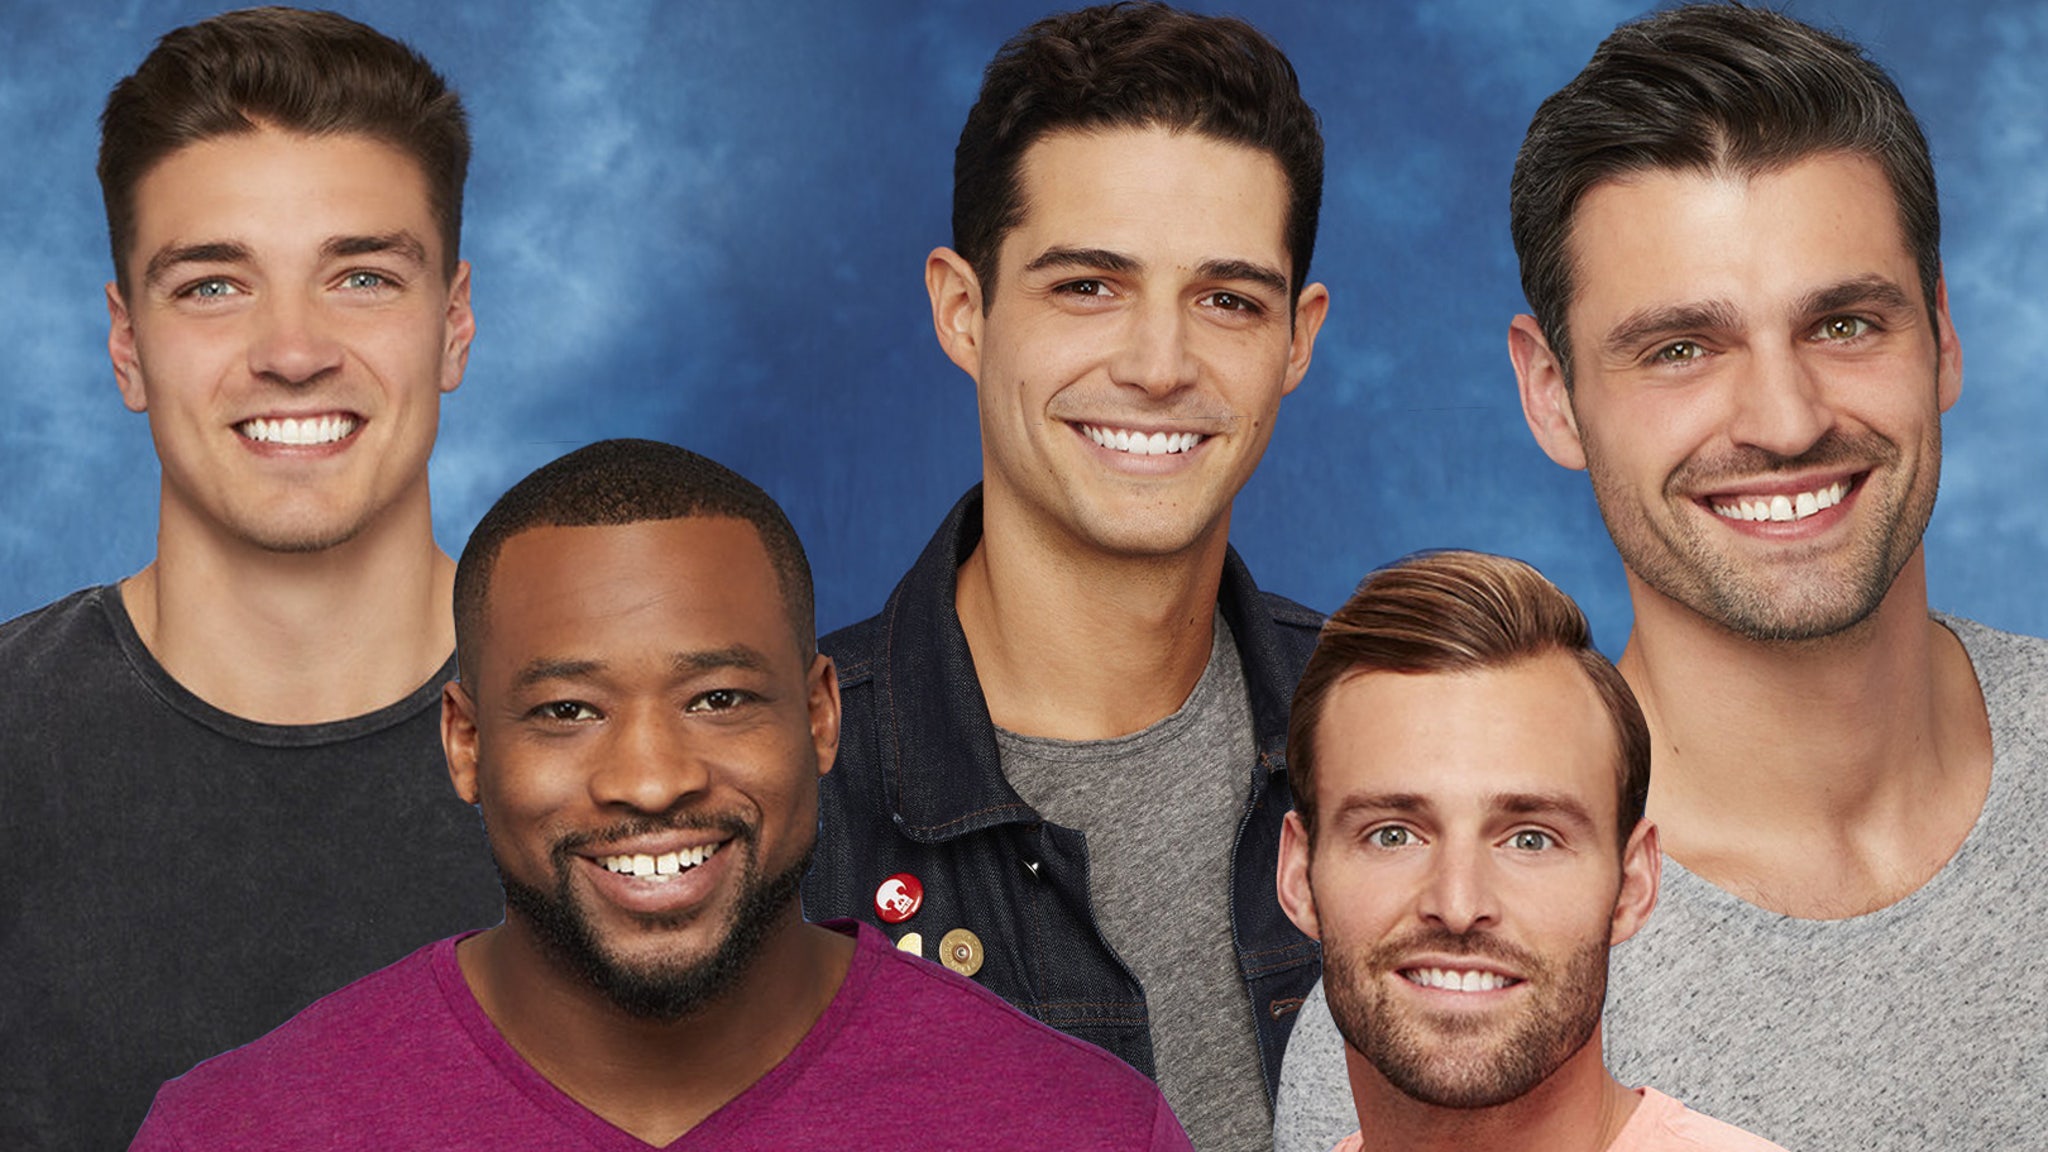 5 Contenders to Be 'The Bachelor': The Good, the Bad and the Handsome